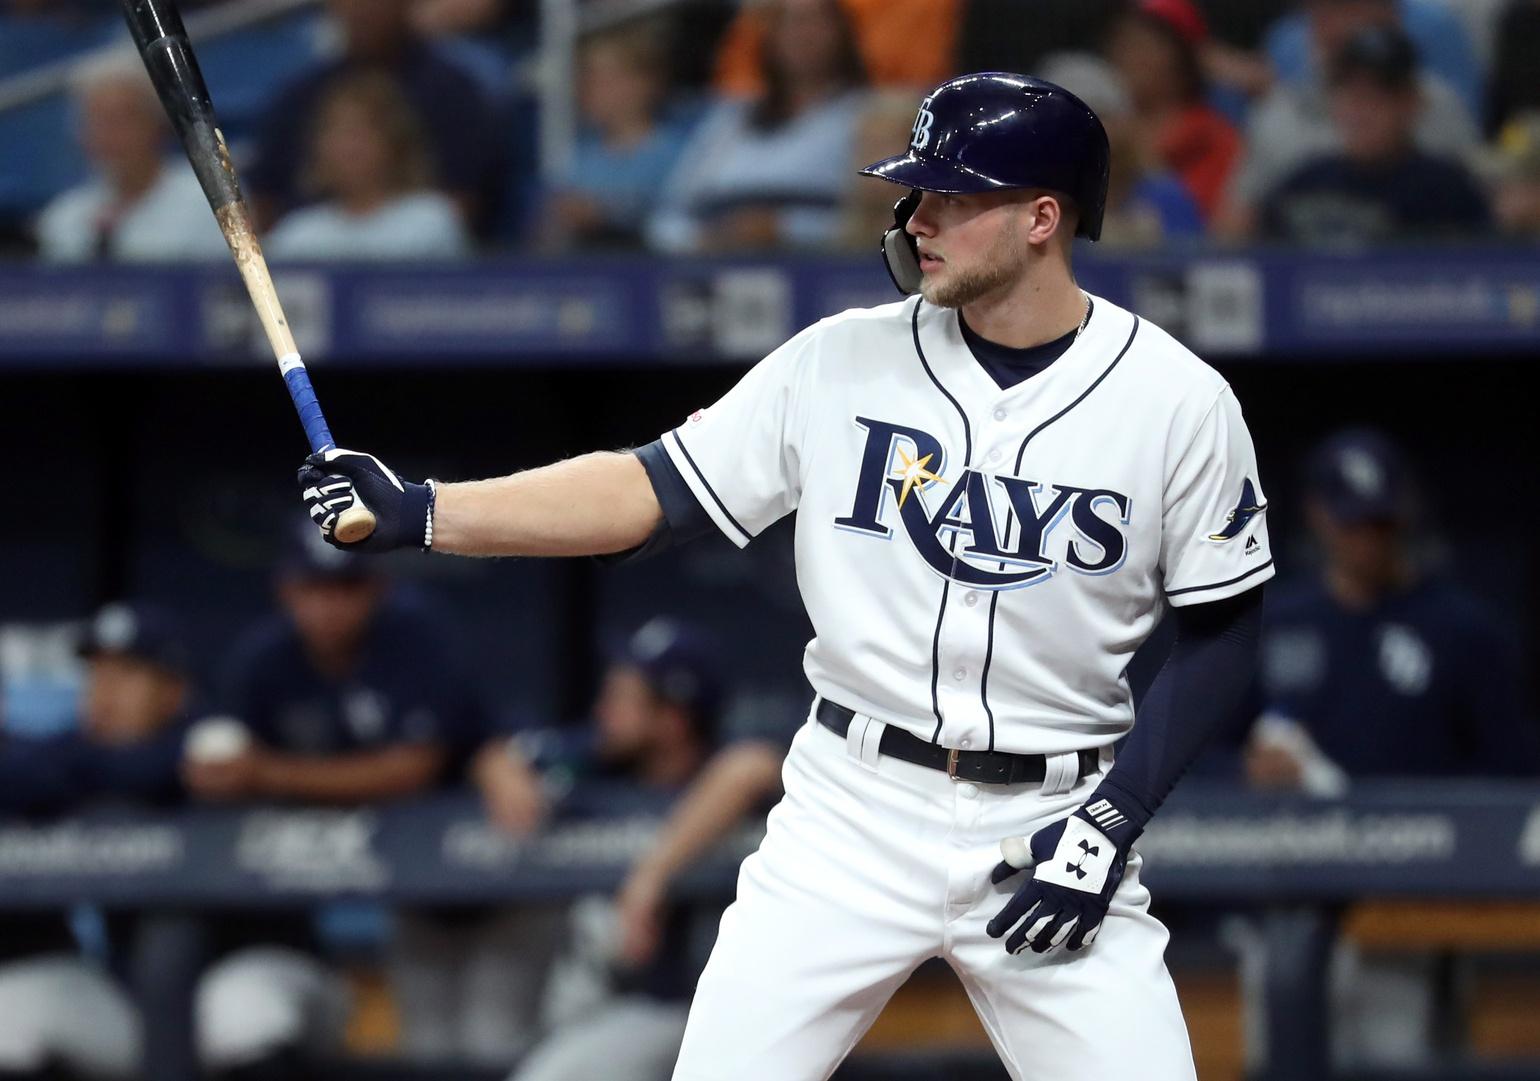 Blue Jays vs Rays Odds and Picks (May 28th, 2019)